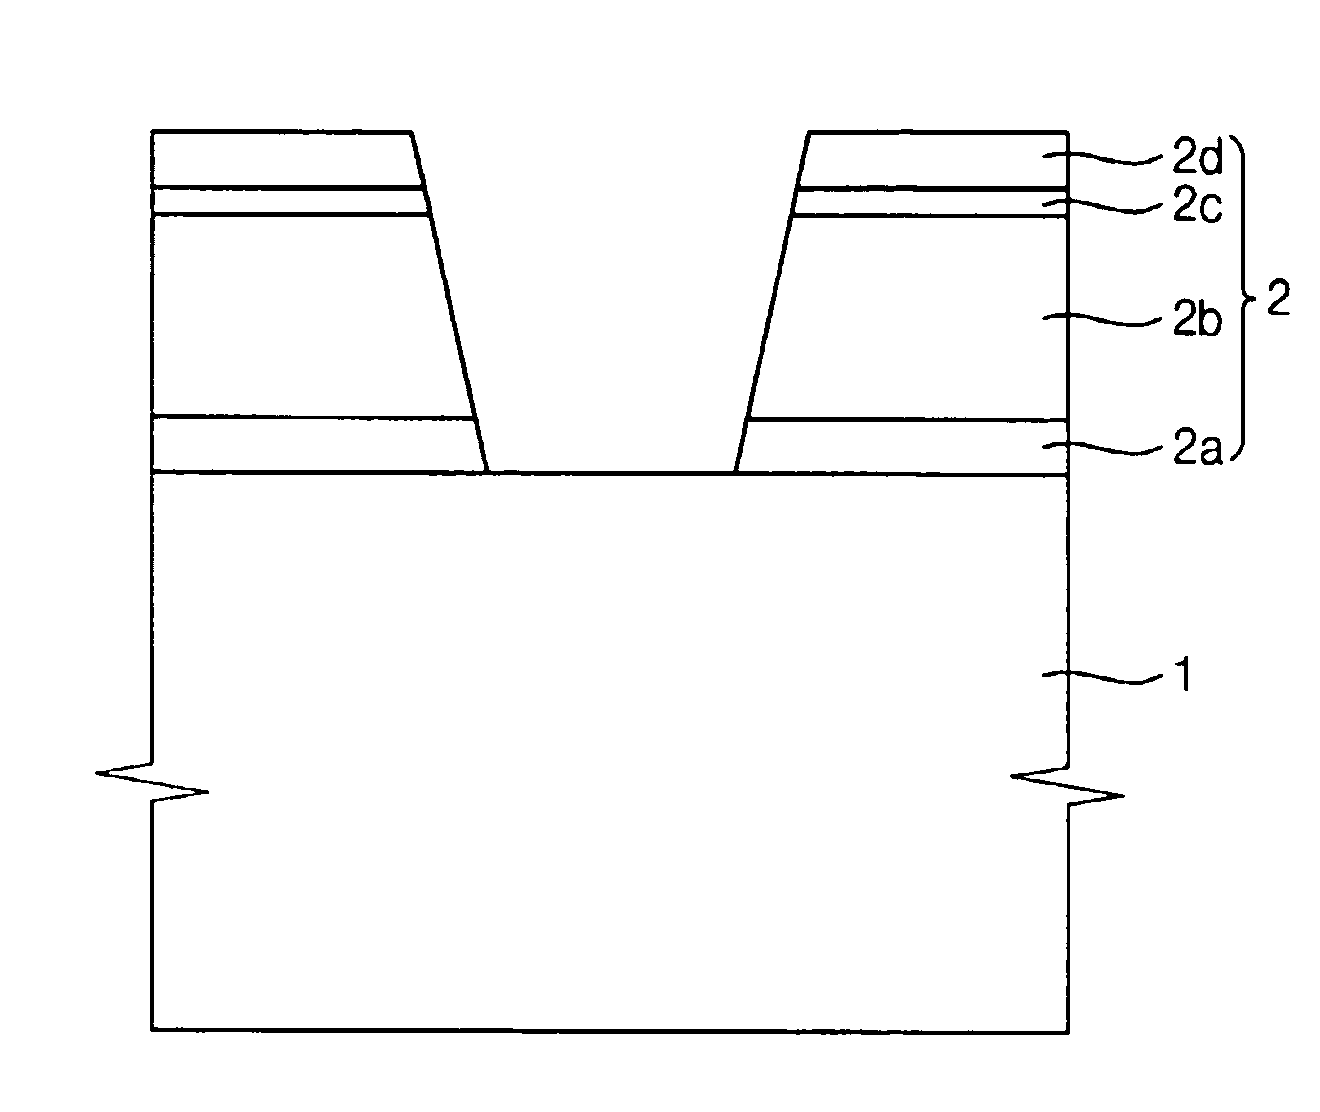 Thin film transistor substrate for display